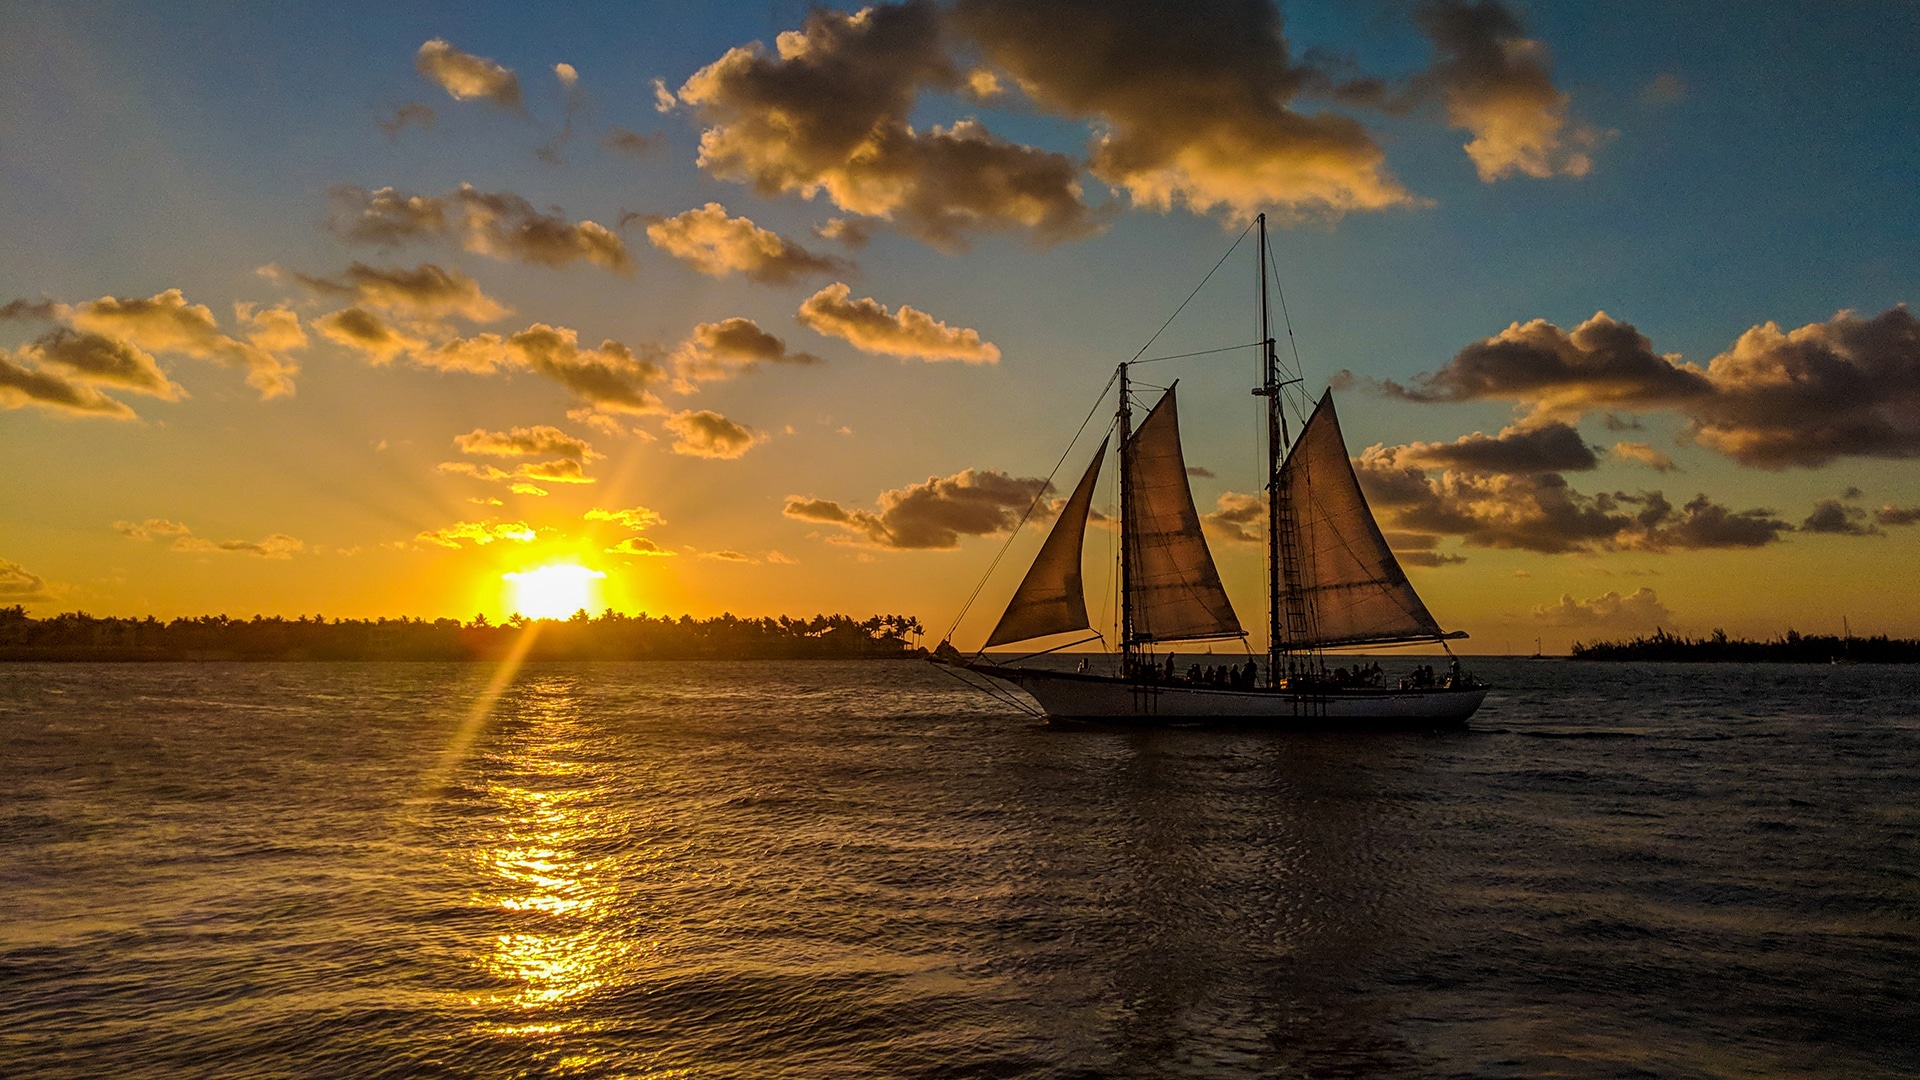 Take A Leisurely Drive Down To Key West Pursuits With Enterprise